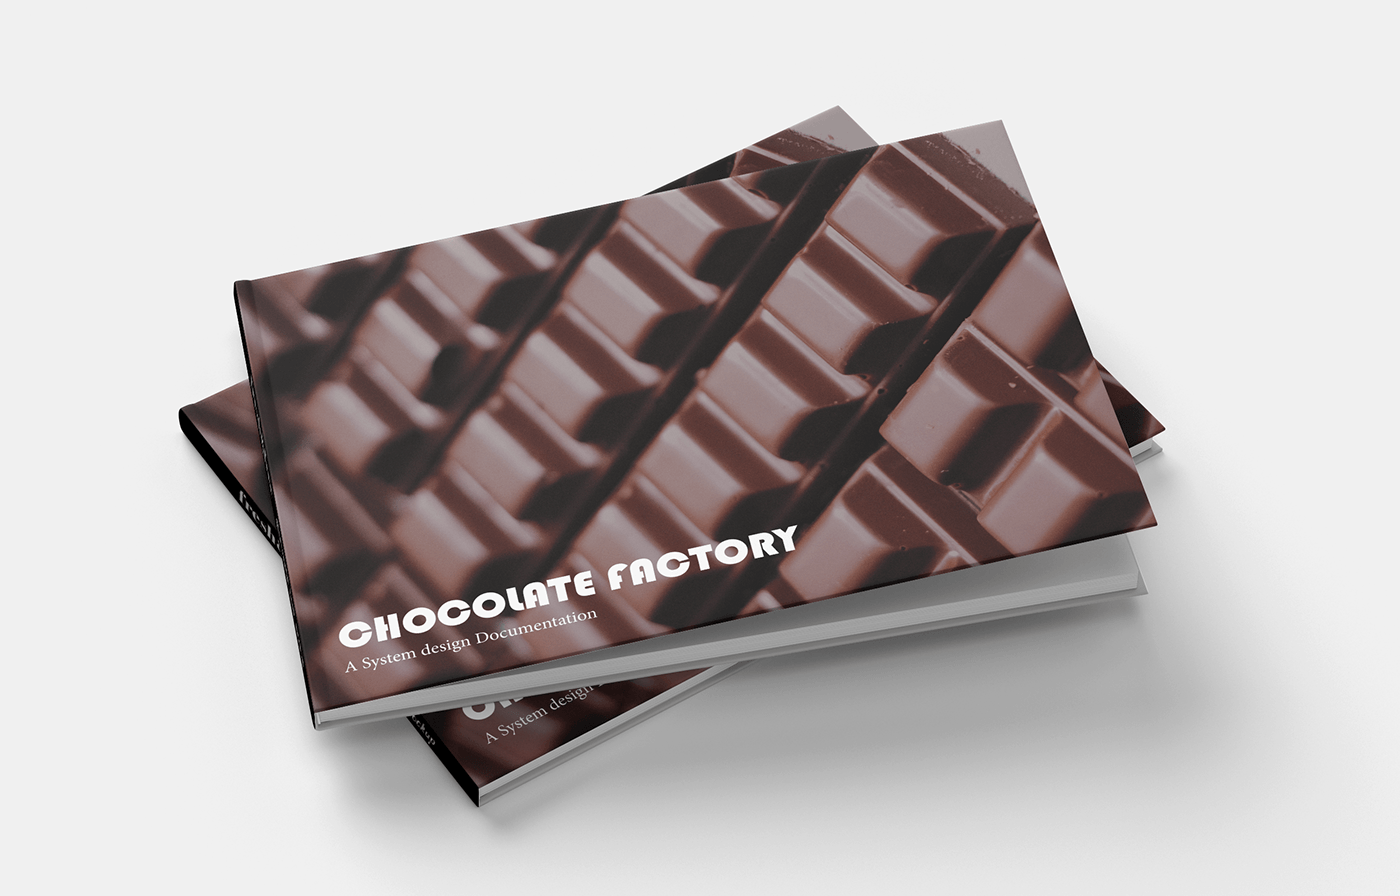 book design publishing   Case Study chocolate factory system design layouting typography   graphic design  Booklet factory